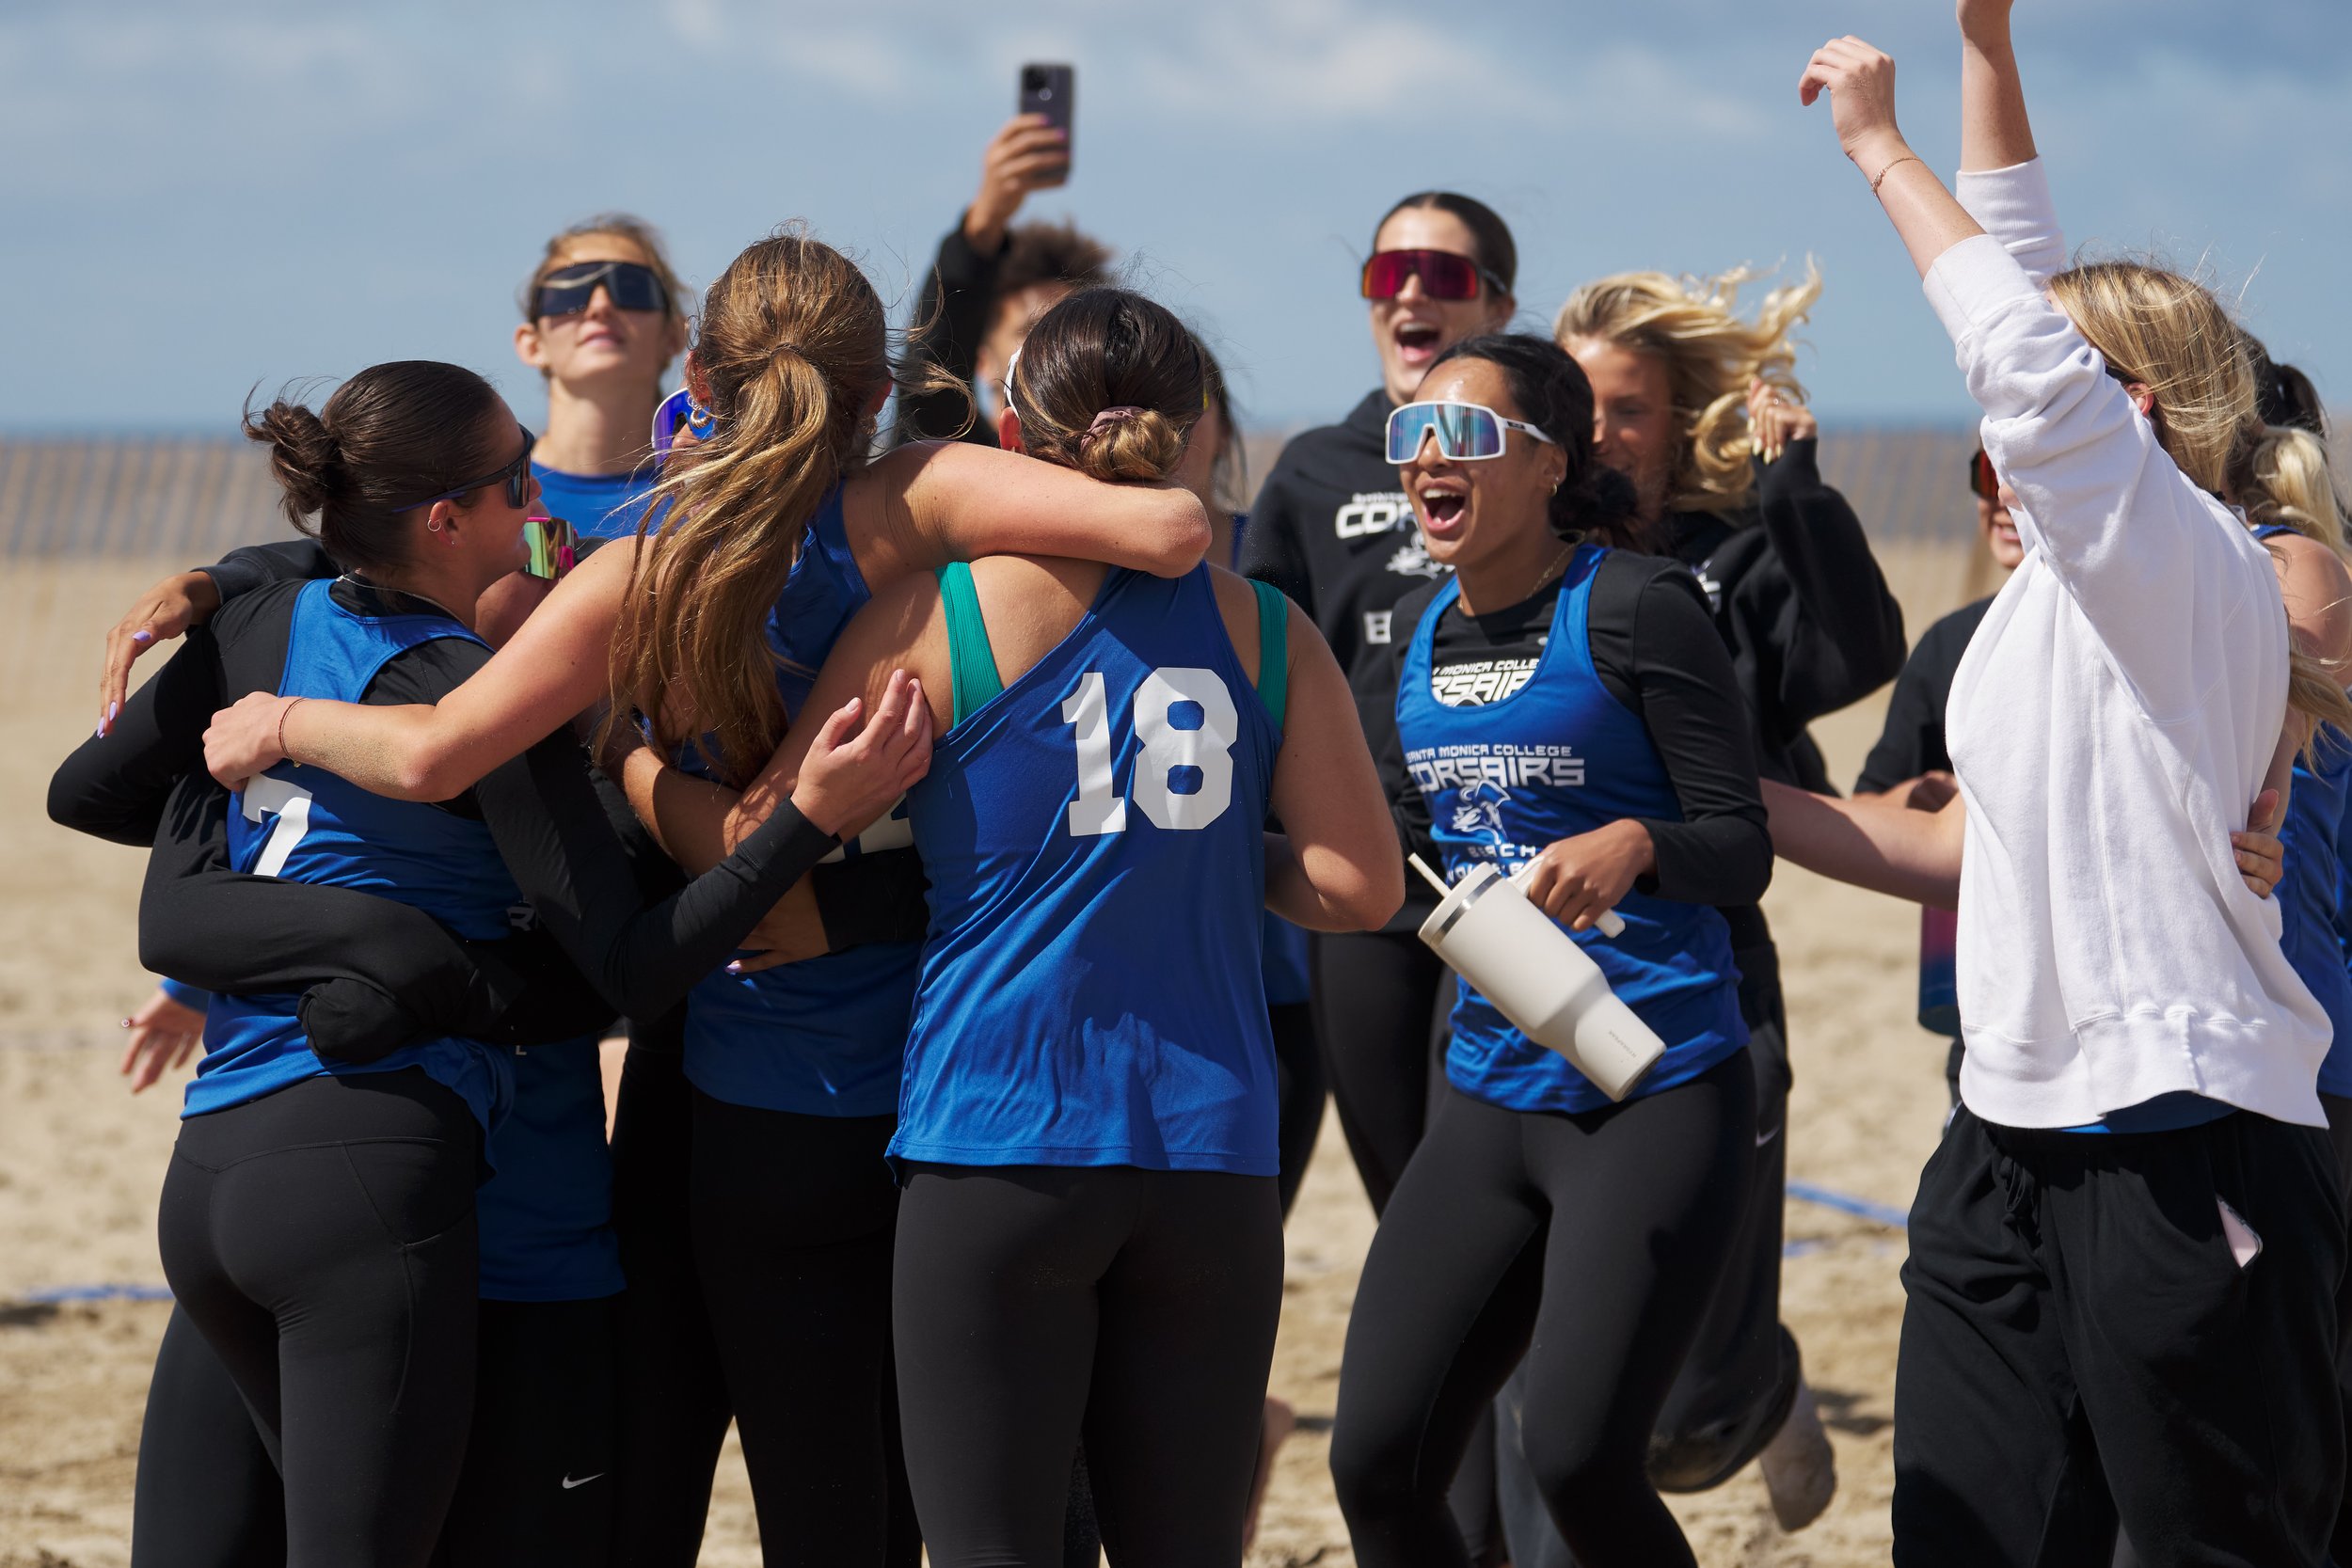  Members of the Santa Monica College Corsairs women's beach volleyball team celebrate after winning the match against the Santa Barbara City College Vaqueros on Friday, April 5, 2024, at Ocean Park in Santa Monica, Calif. The Corsairs won 4-1. (Nicho